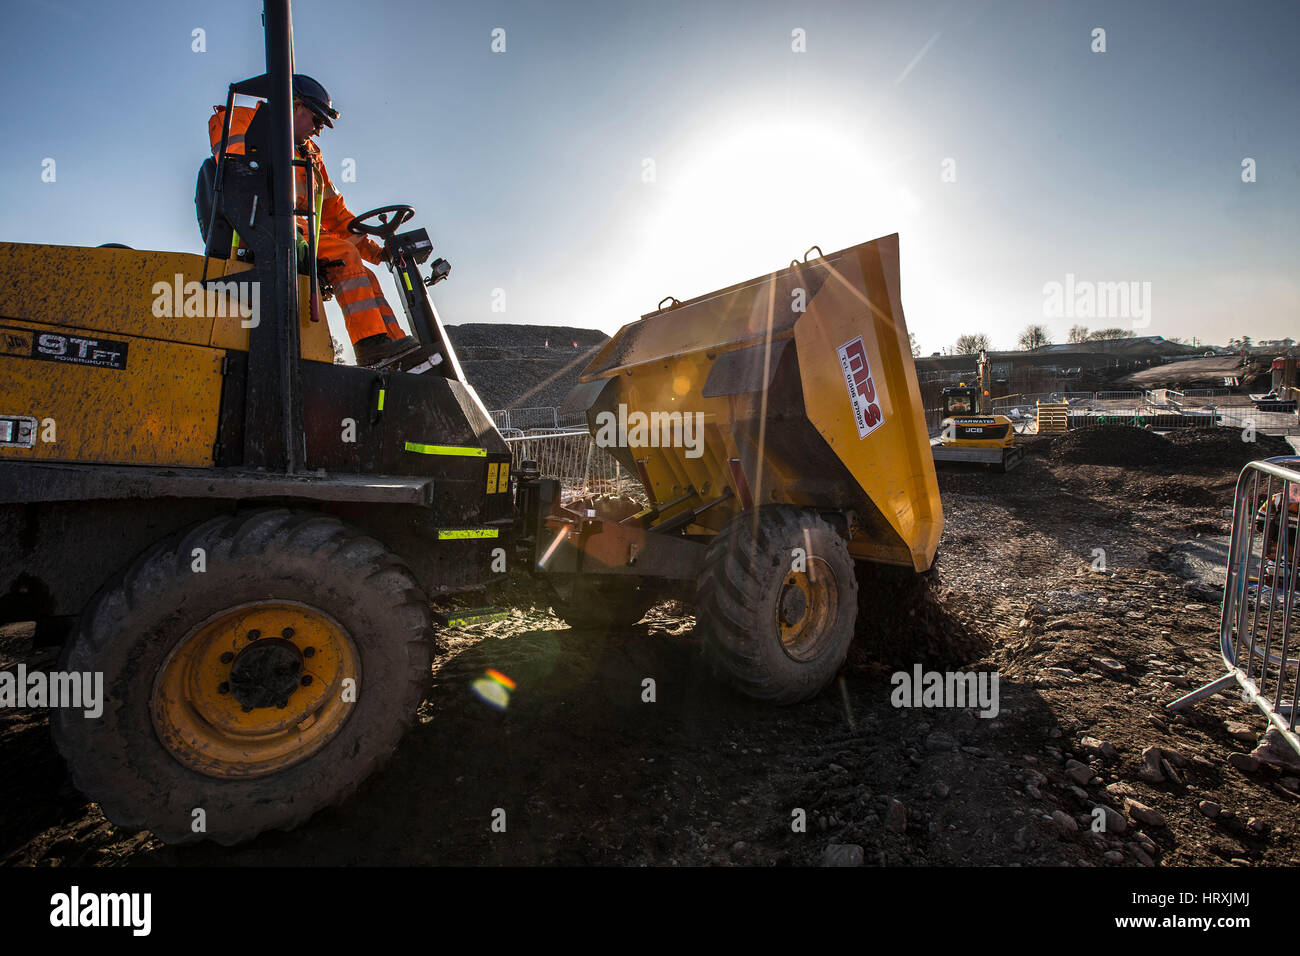 Dumper truck and driver Stock Photo